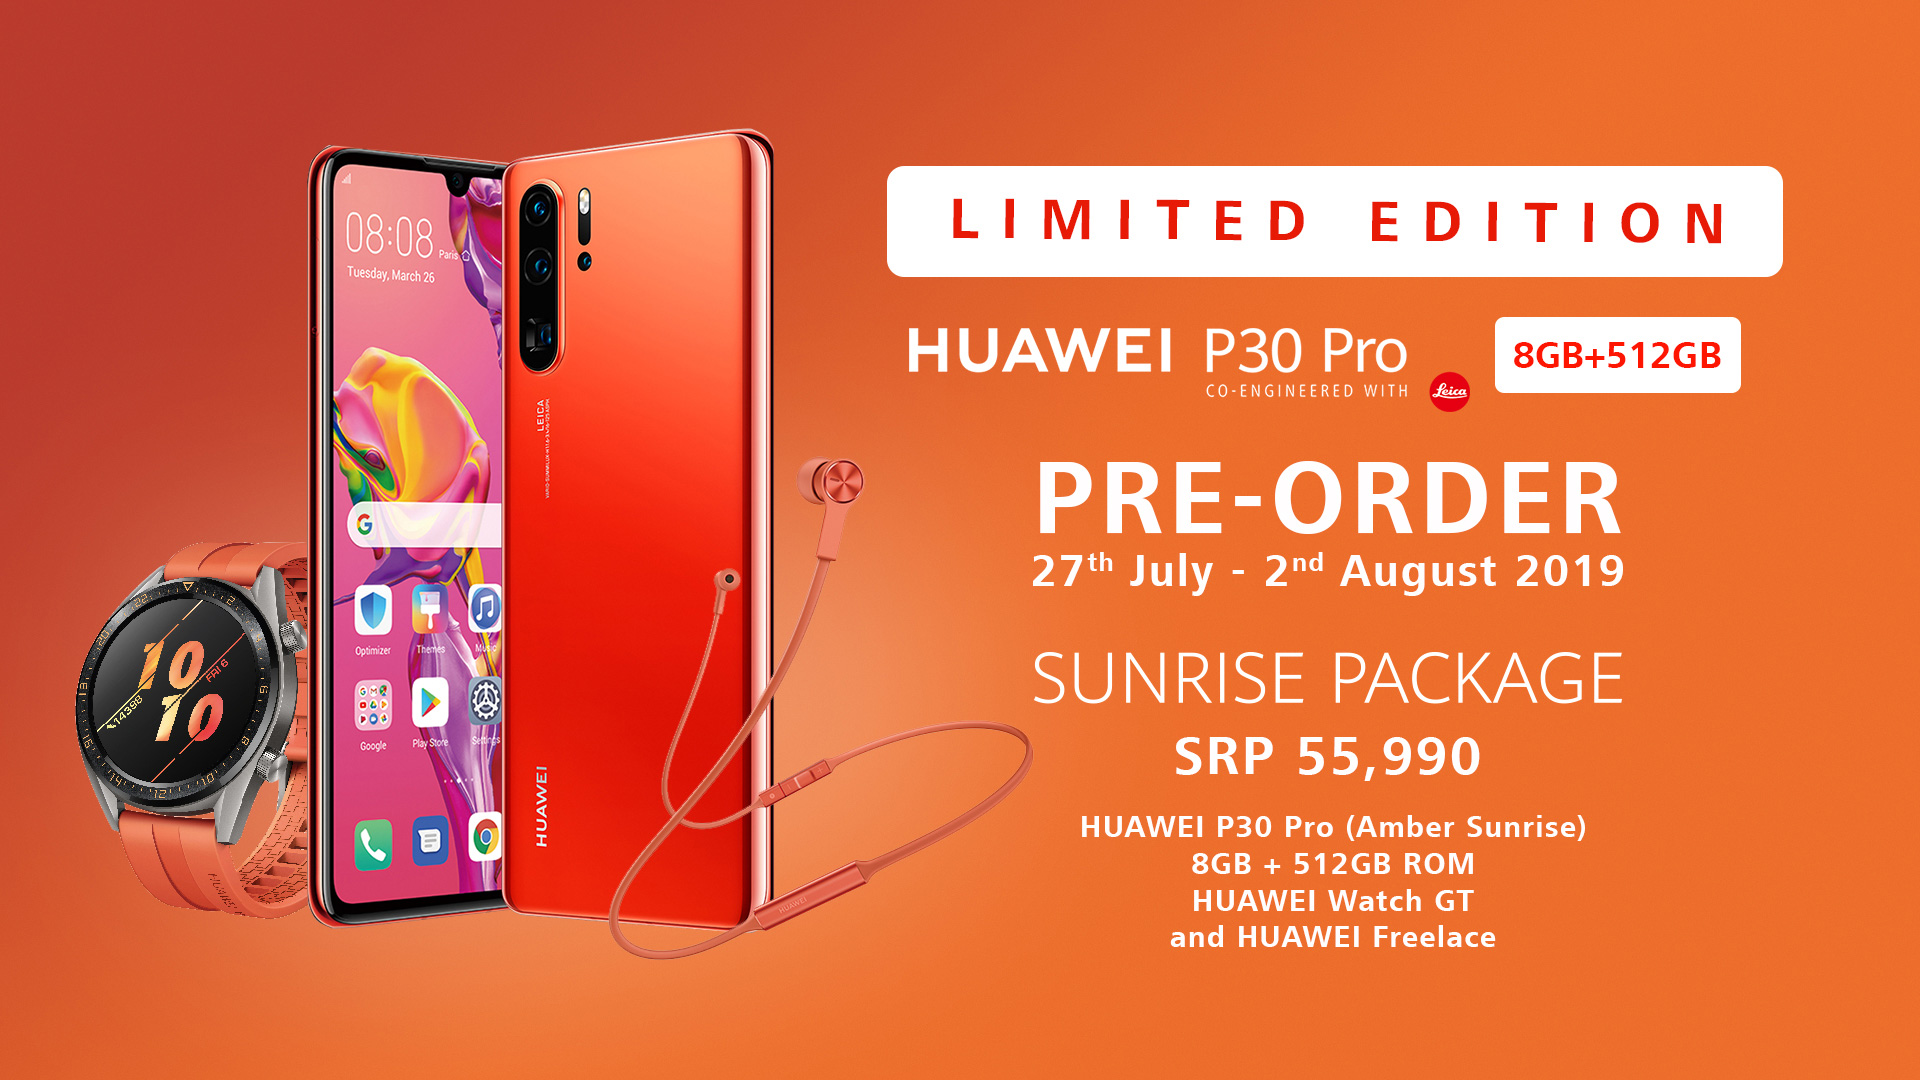 HUAWEI Y9 PRIME 2019 PRE-ORDER AND EXCITING ROADSHOWS!